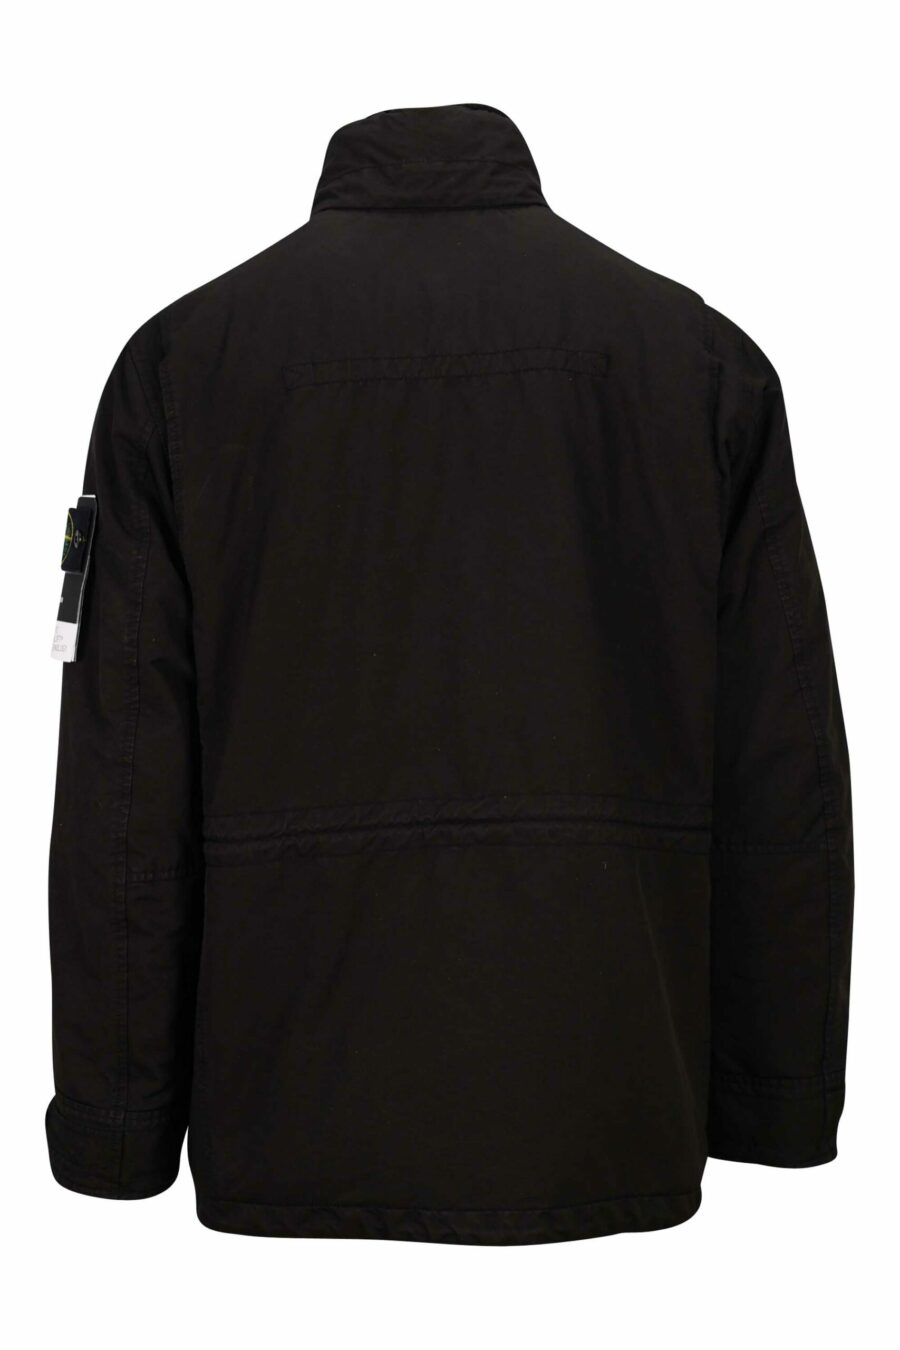 Black parka with pockets and side logo patch - 8052572794827 2 scaled